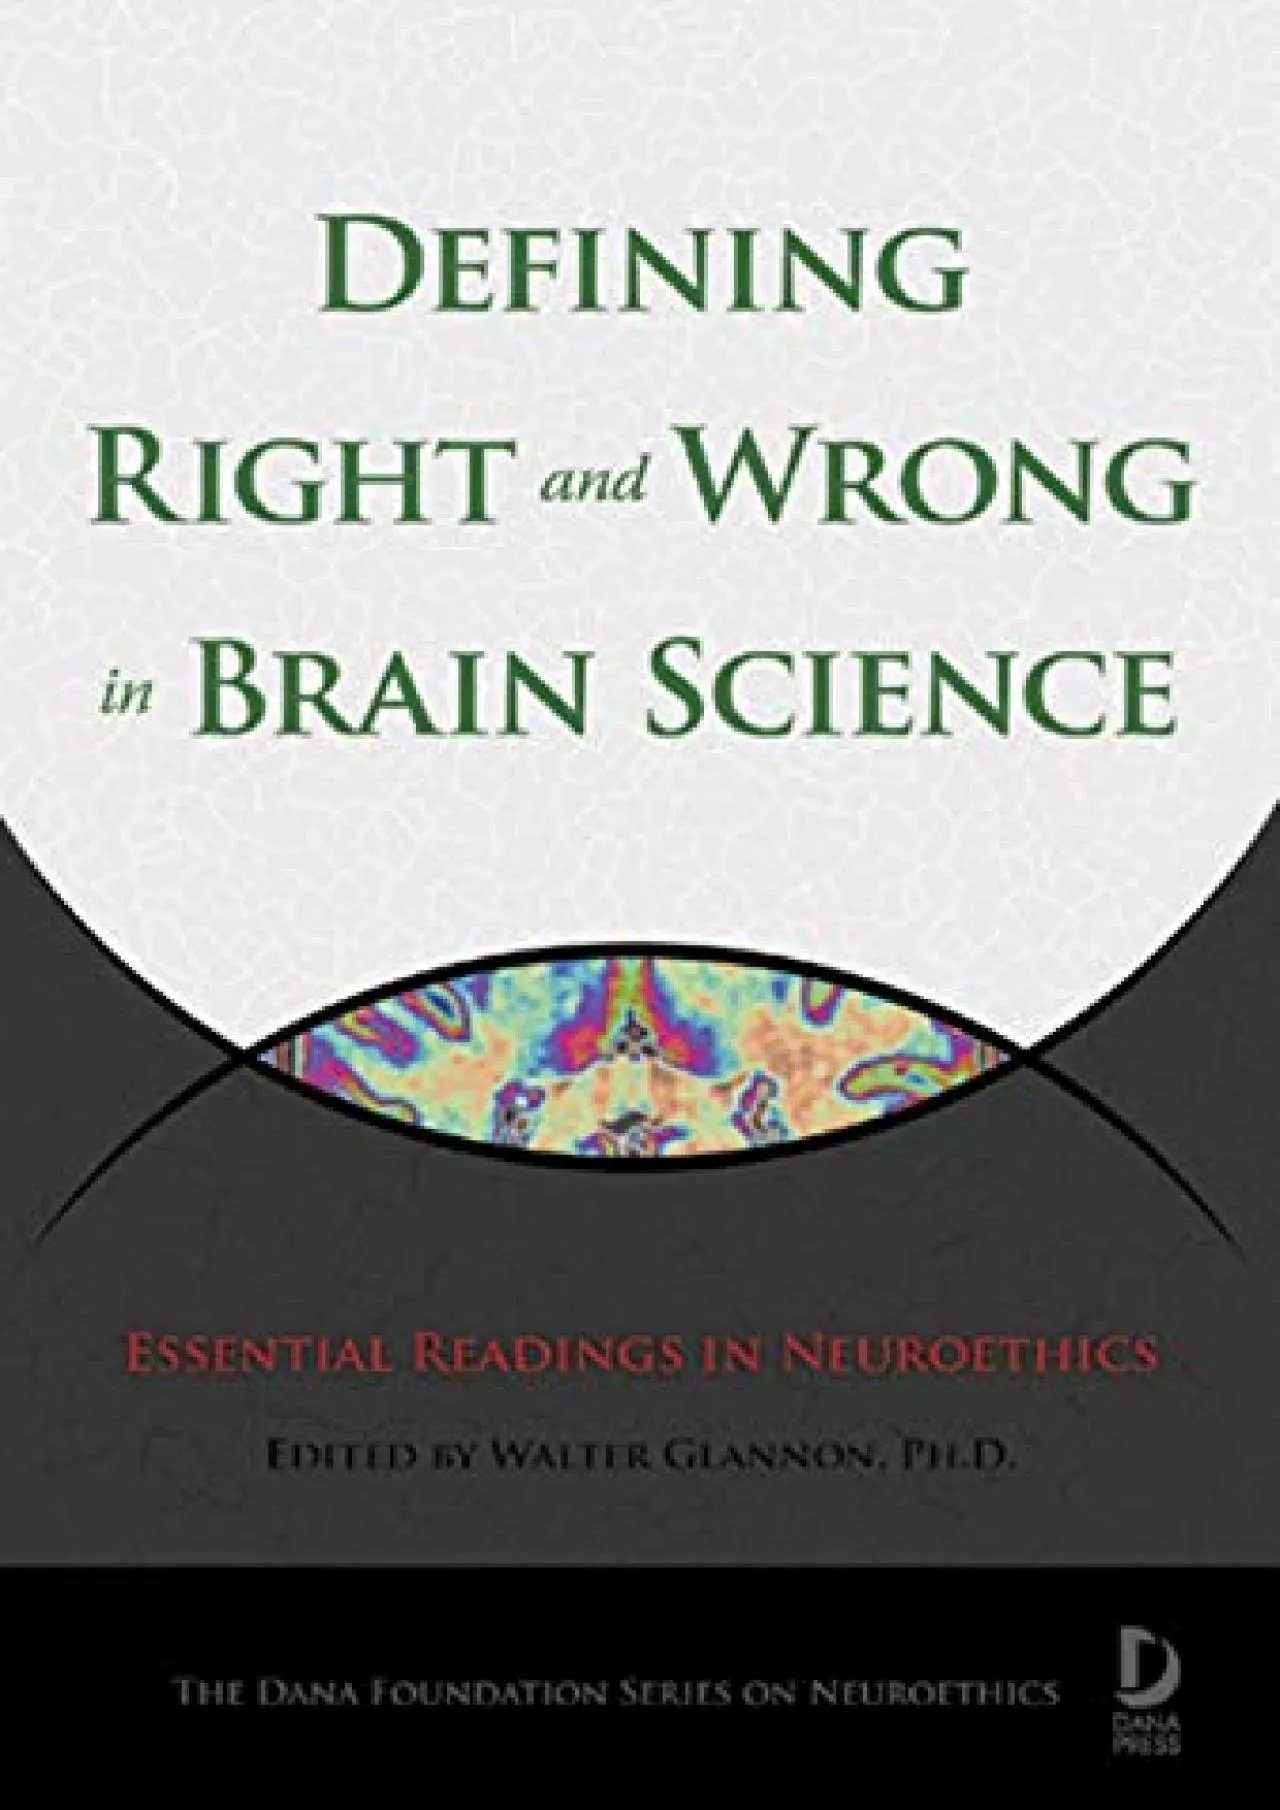 (DOWNLOAD)-Defining Right and Wrong in Brain Science: Essential Readings in Neuroethics